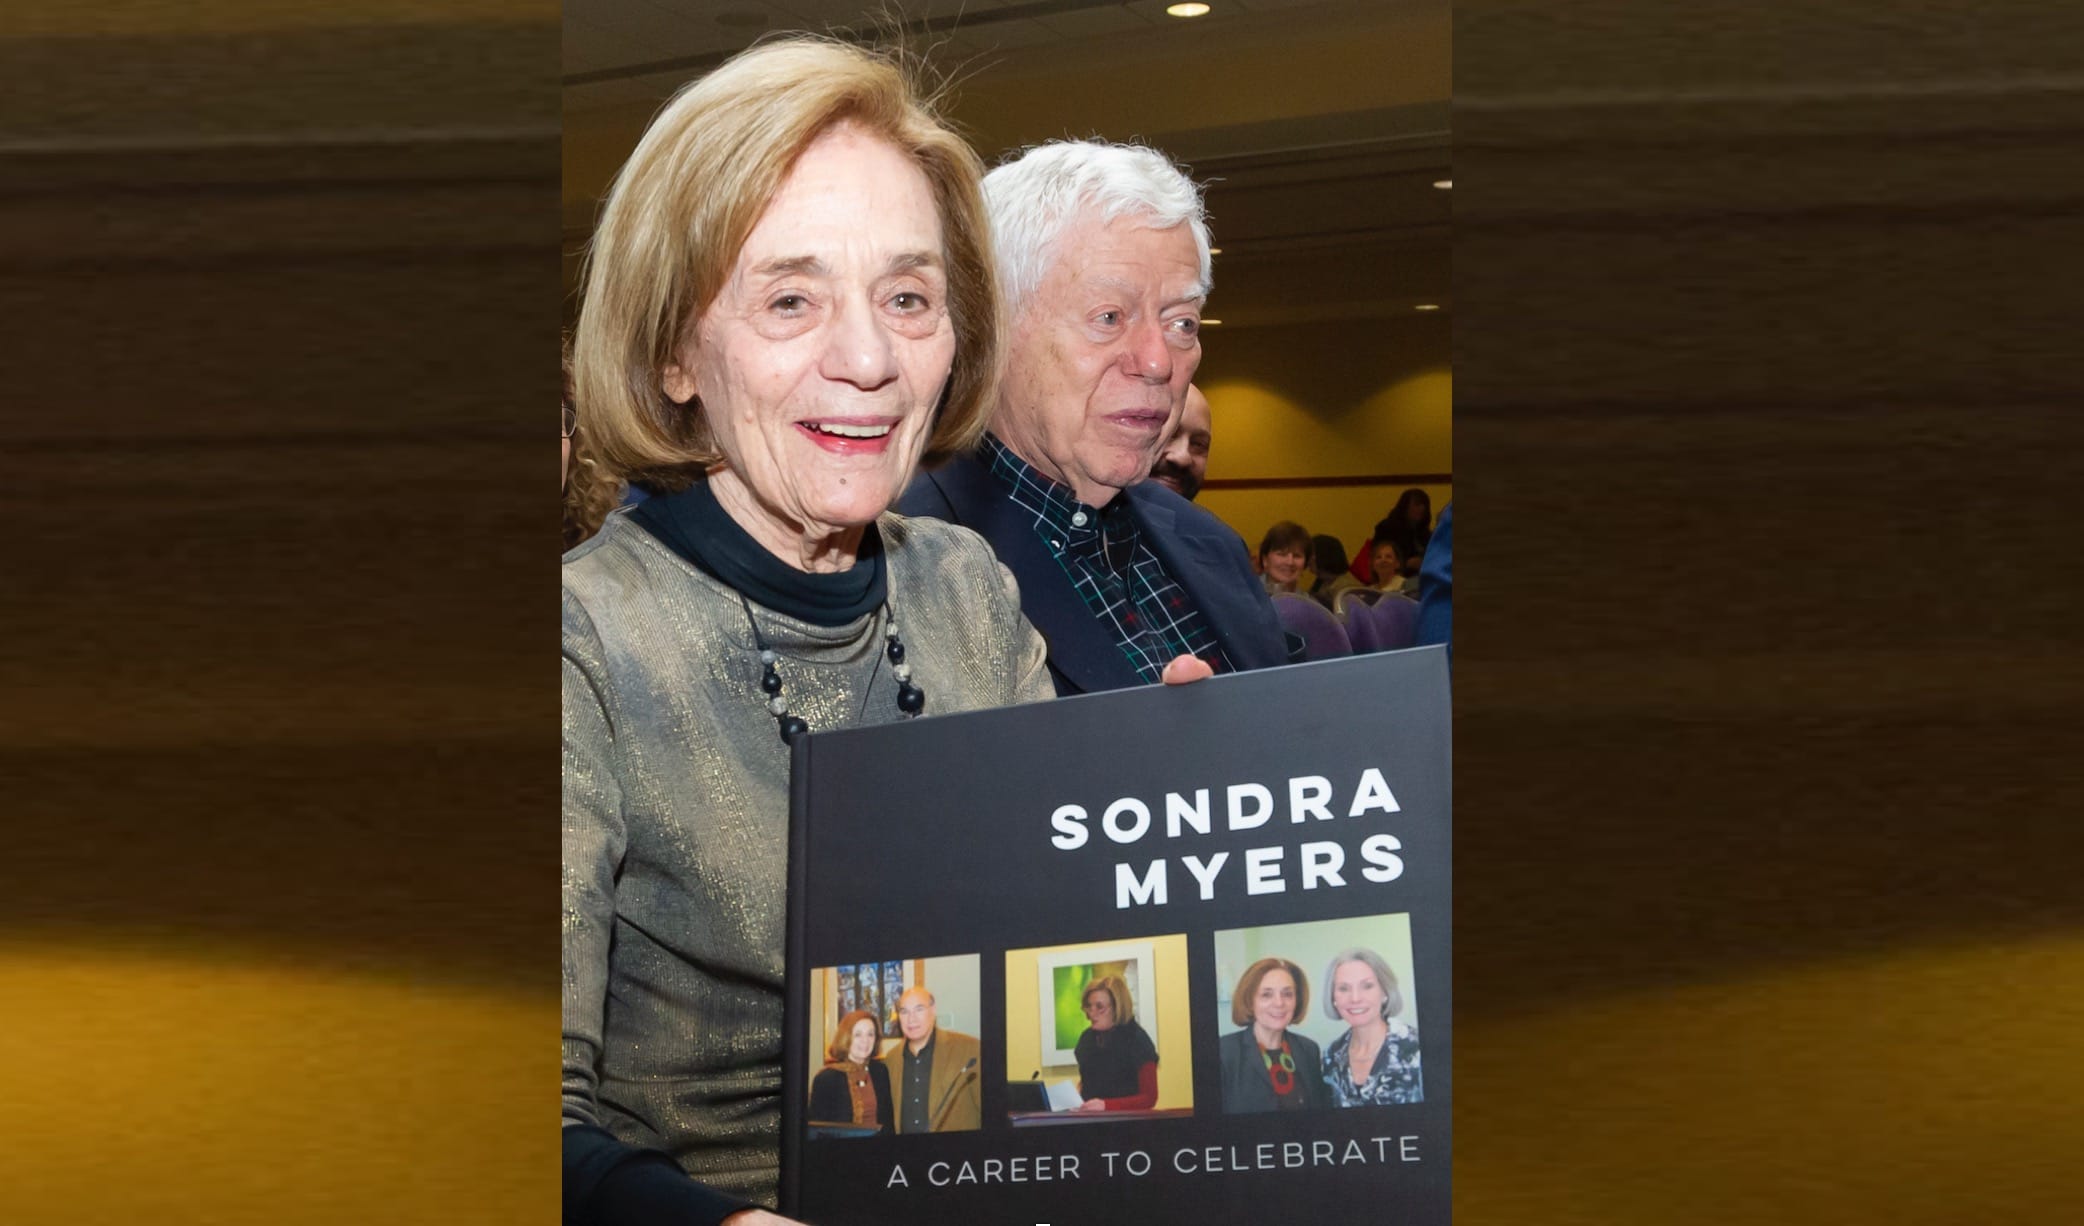 Sondra Myers, founding director of The University of Scranton’s Schemel Forum, stepped down from post at semester’s end. In April, the University hosted a tribute to her for her many contributions. From left: Sondra Myers and her husband, Morey Myers, J.D.